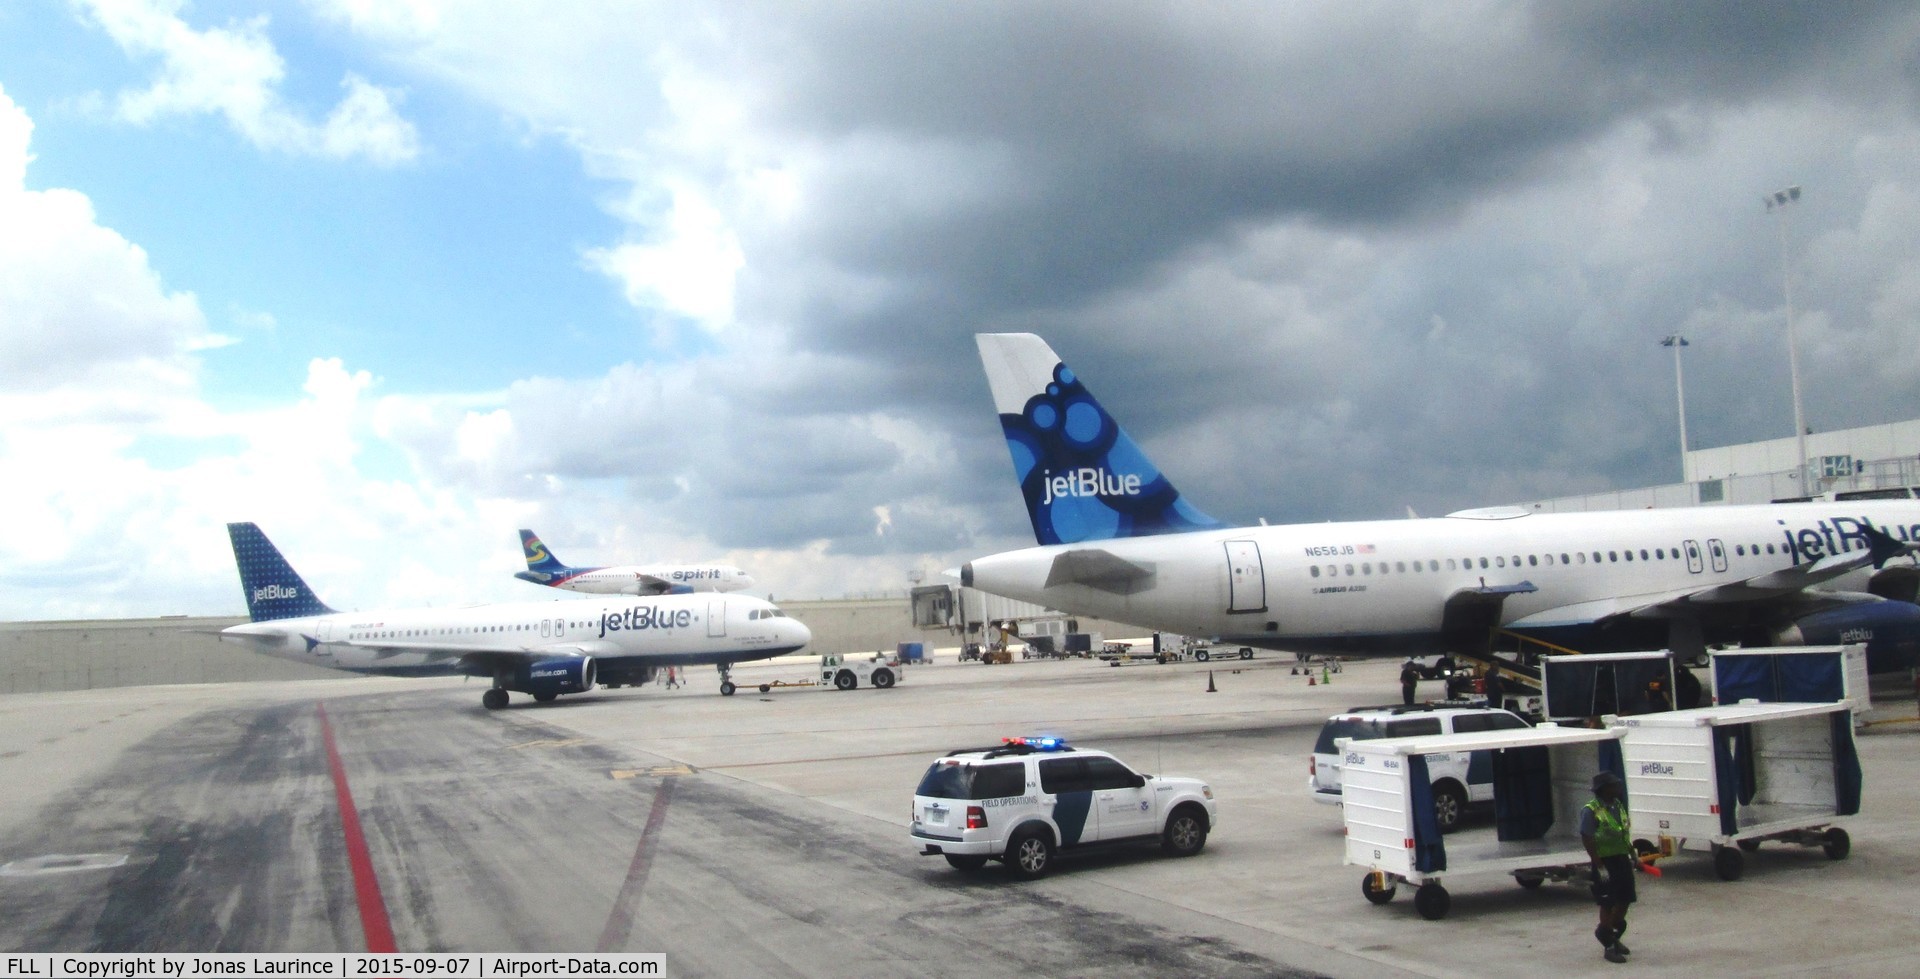 Fort Lauderdale/hollywood International Airport (FLL) - JetBlue and Spirit Aircrafts at the Fort Lauderdale International Airport